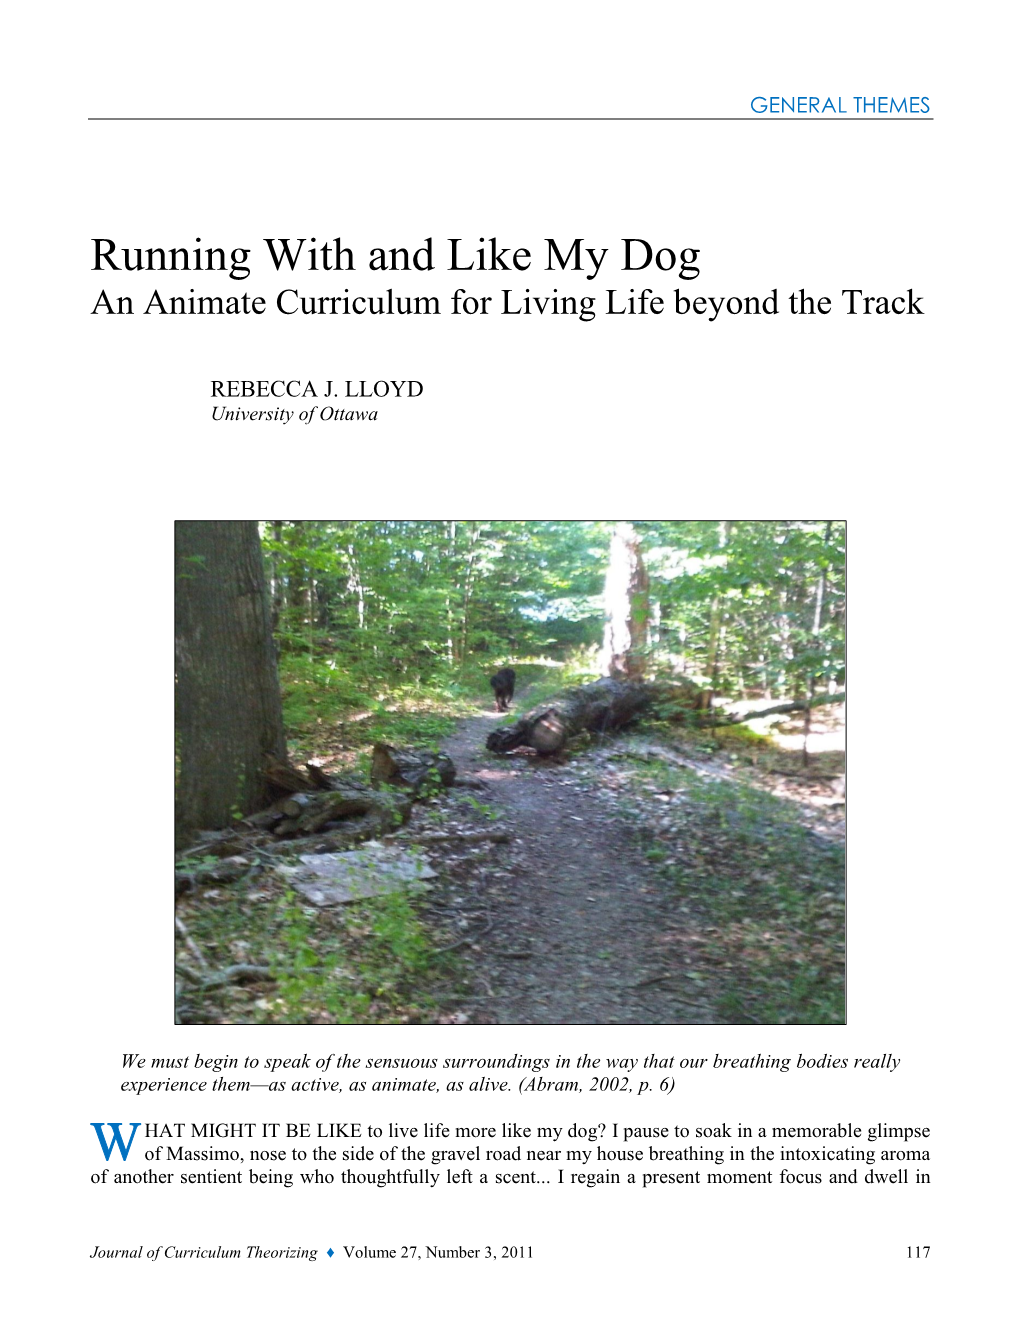 Running with and Like My Dog an Animate Curriculum for Living Life Beyond the Track